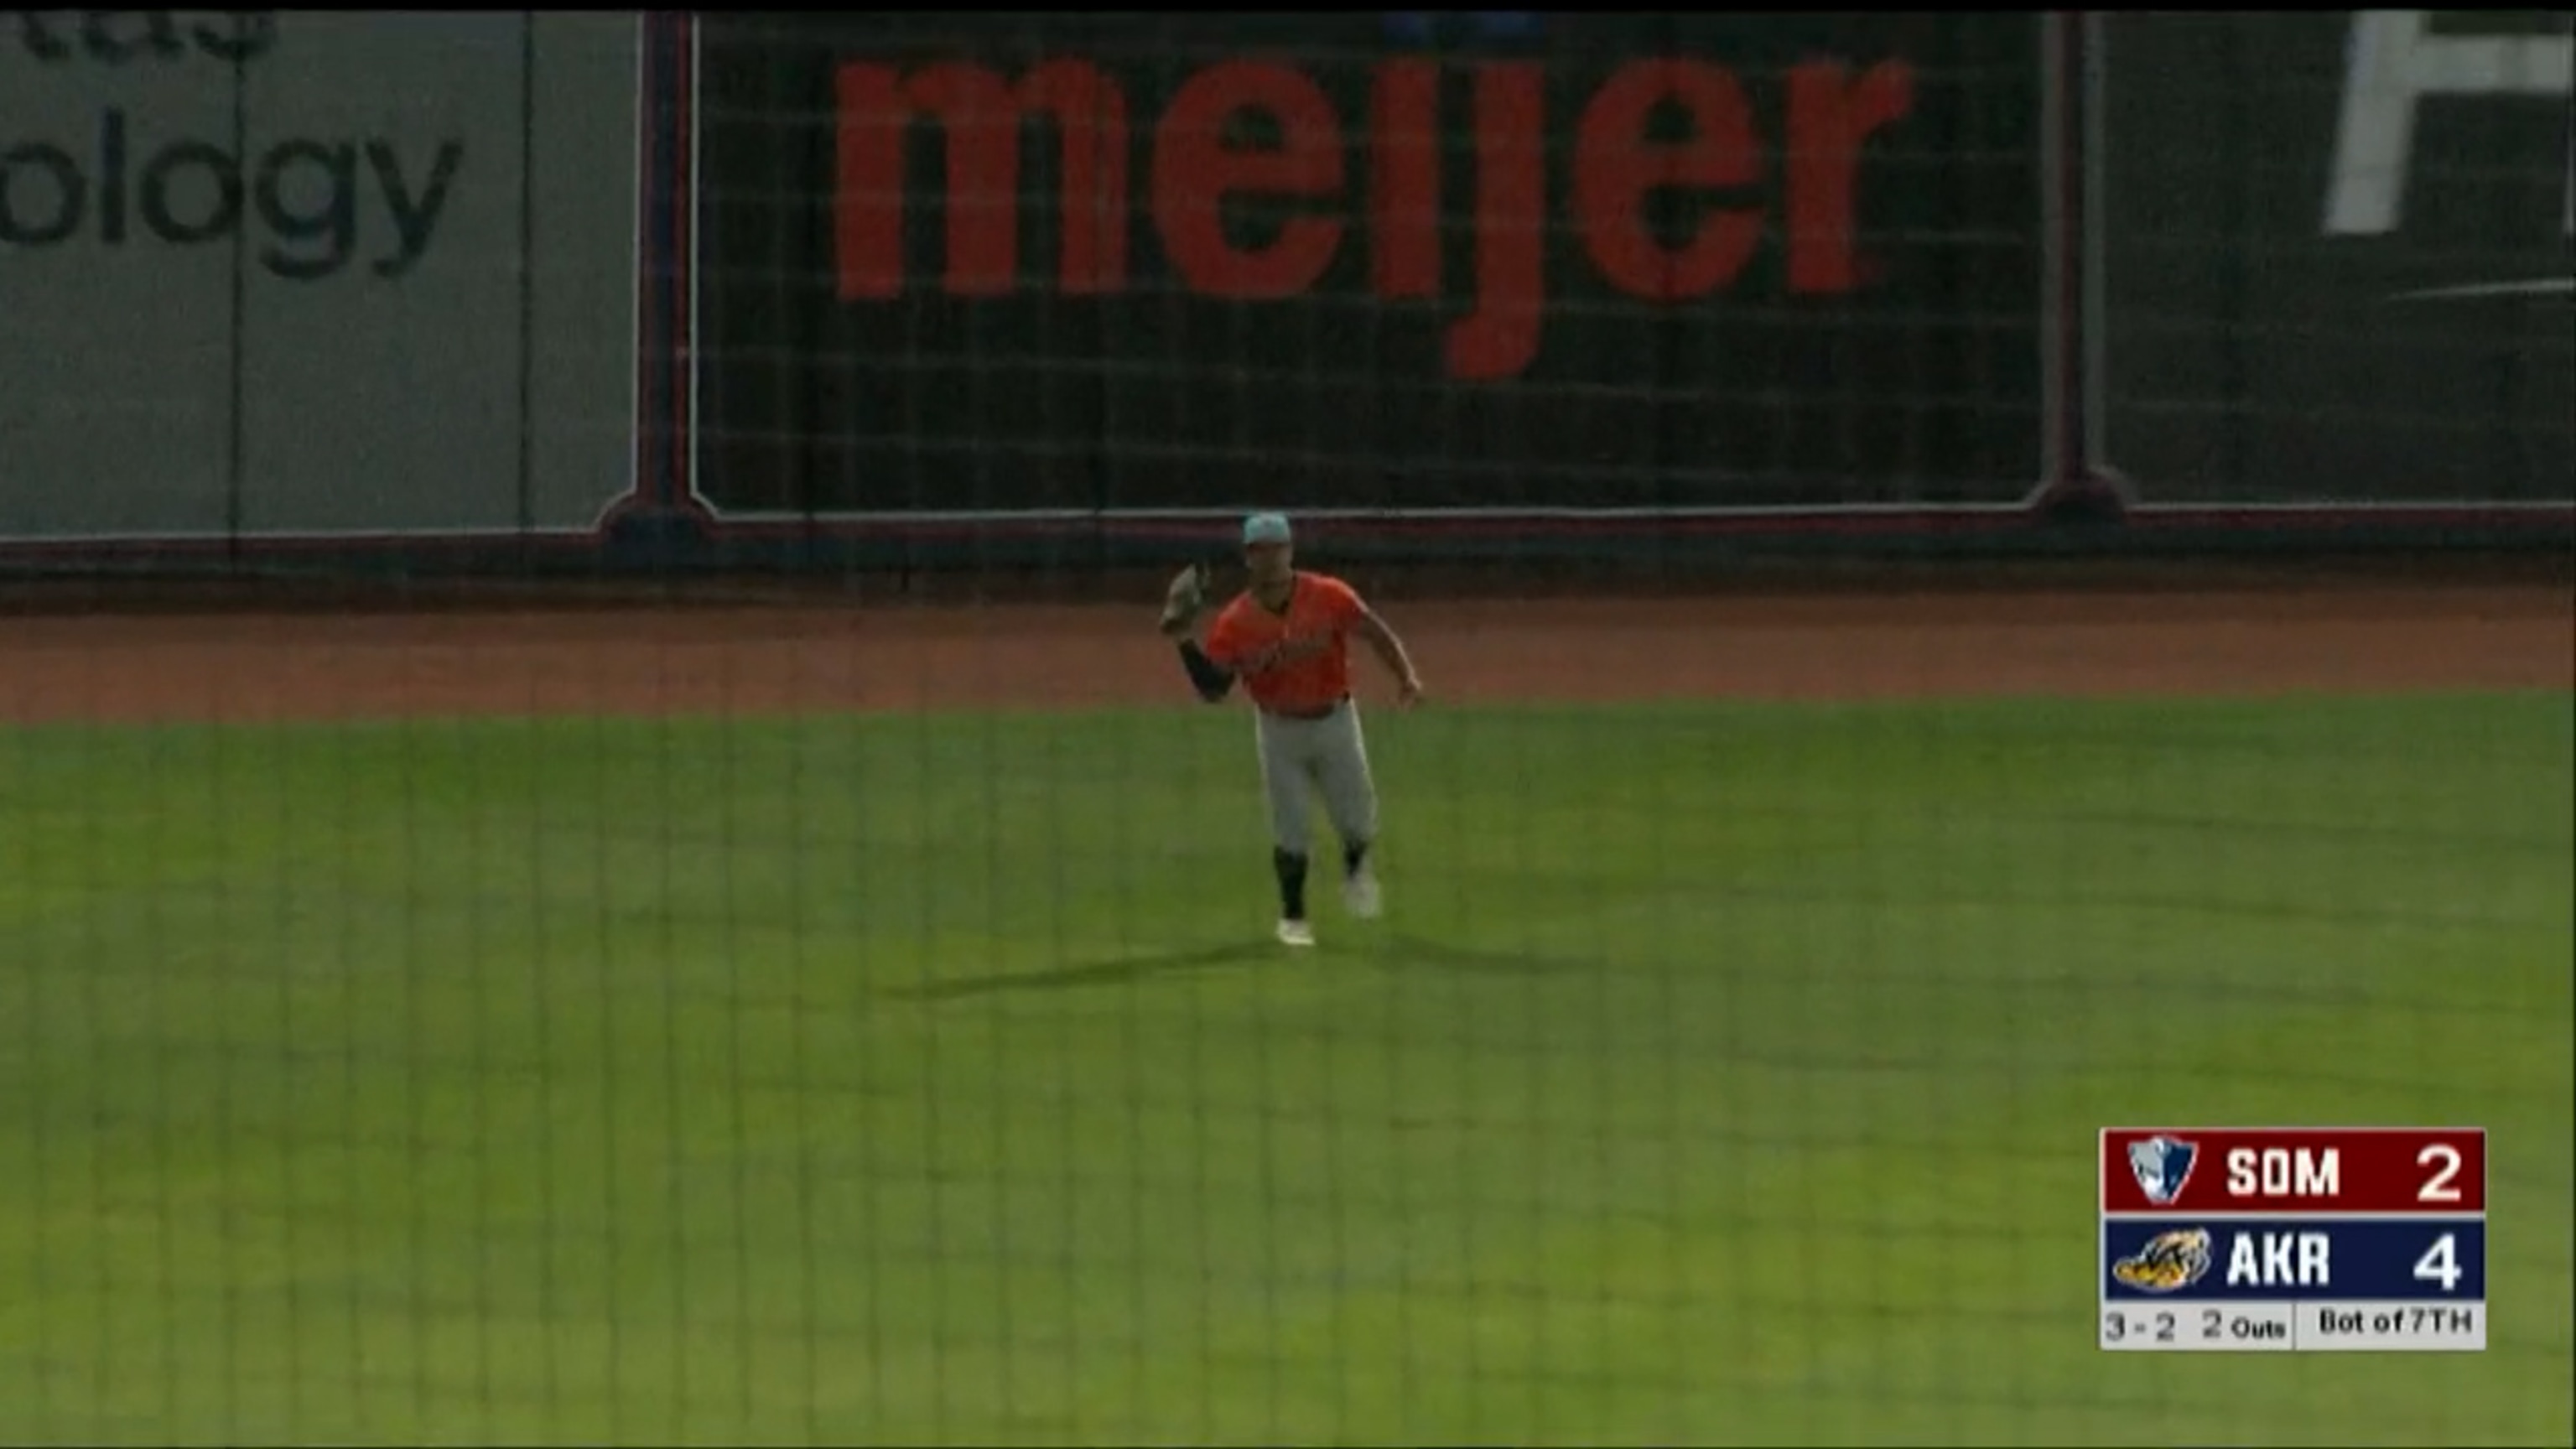 Yankees prospect Anthony Seigler catches right-handed, plays outfield  left-handed